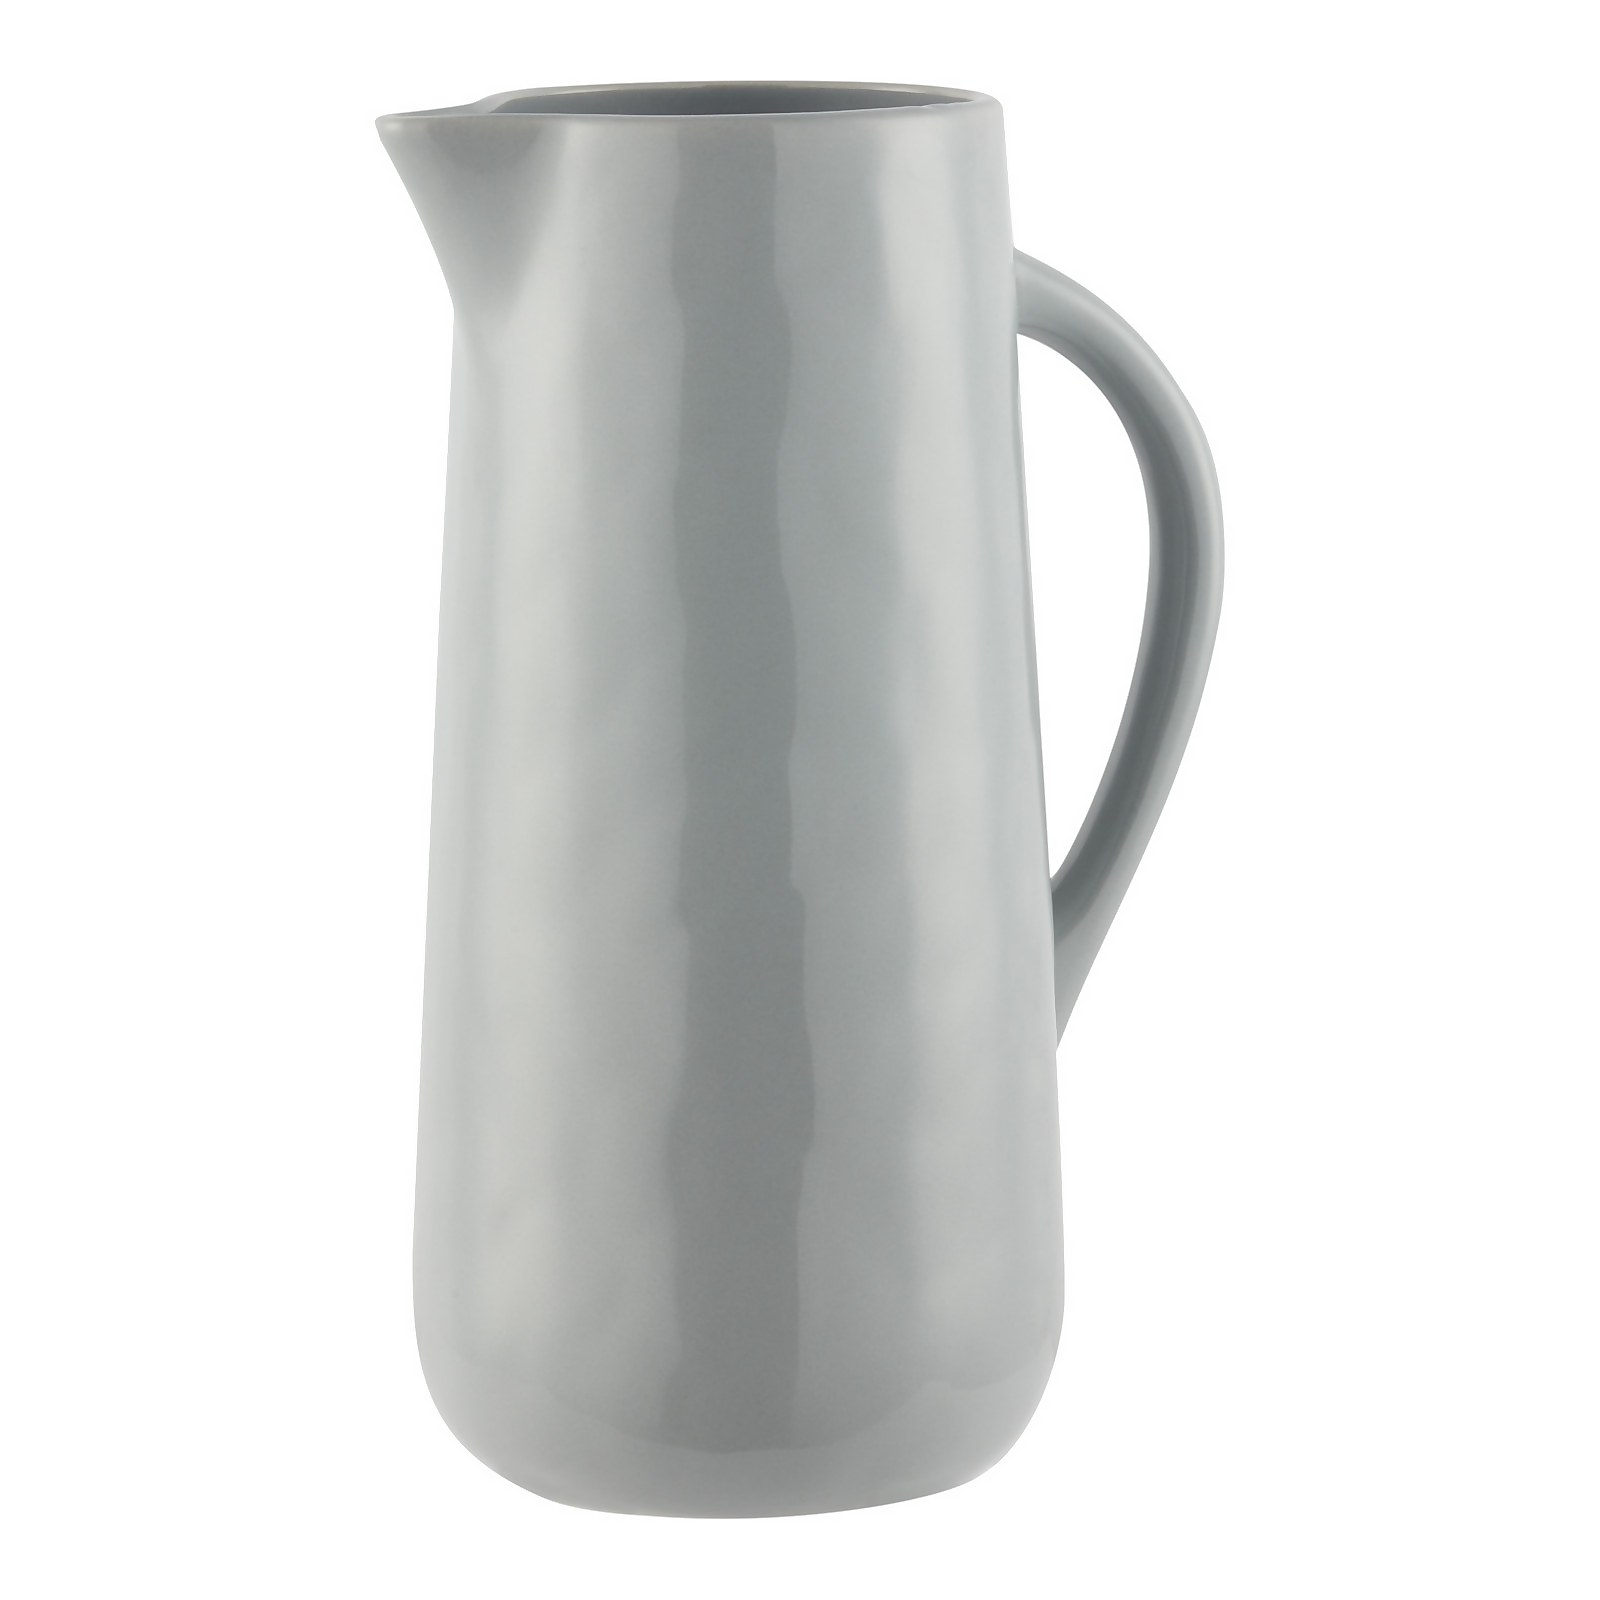 Photo of Country Living Ceramic Jug - Country Grey